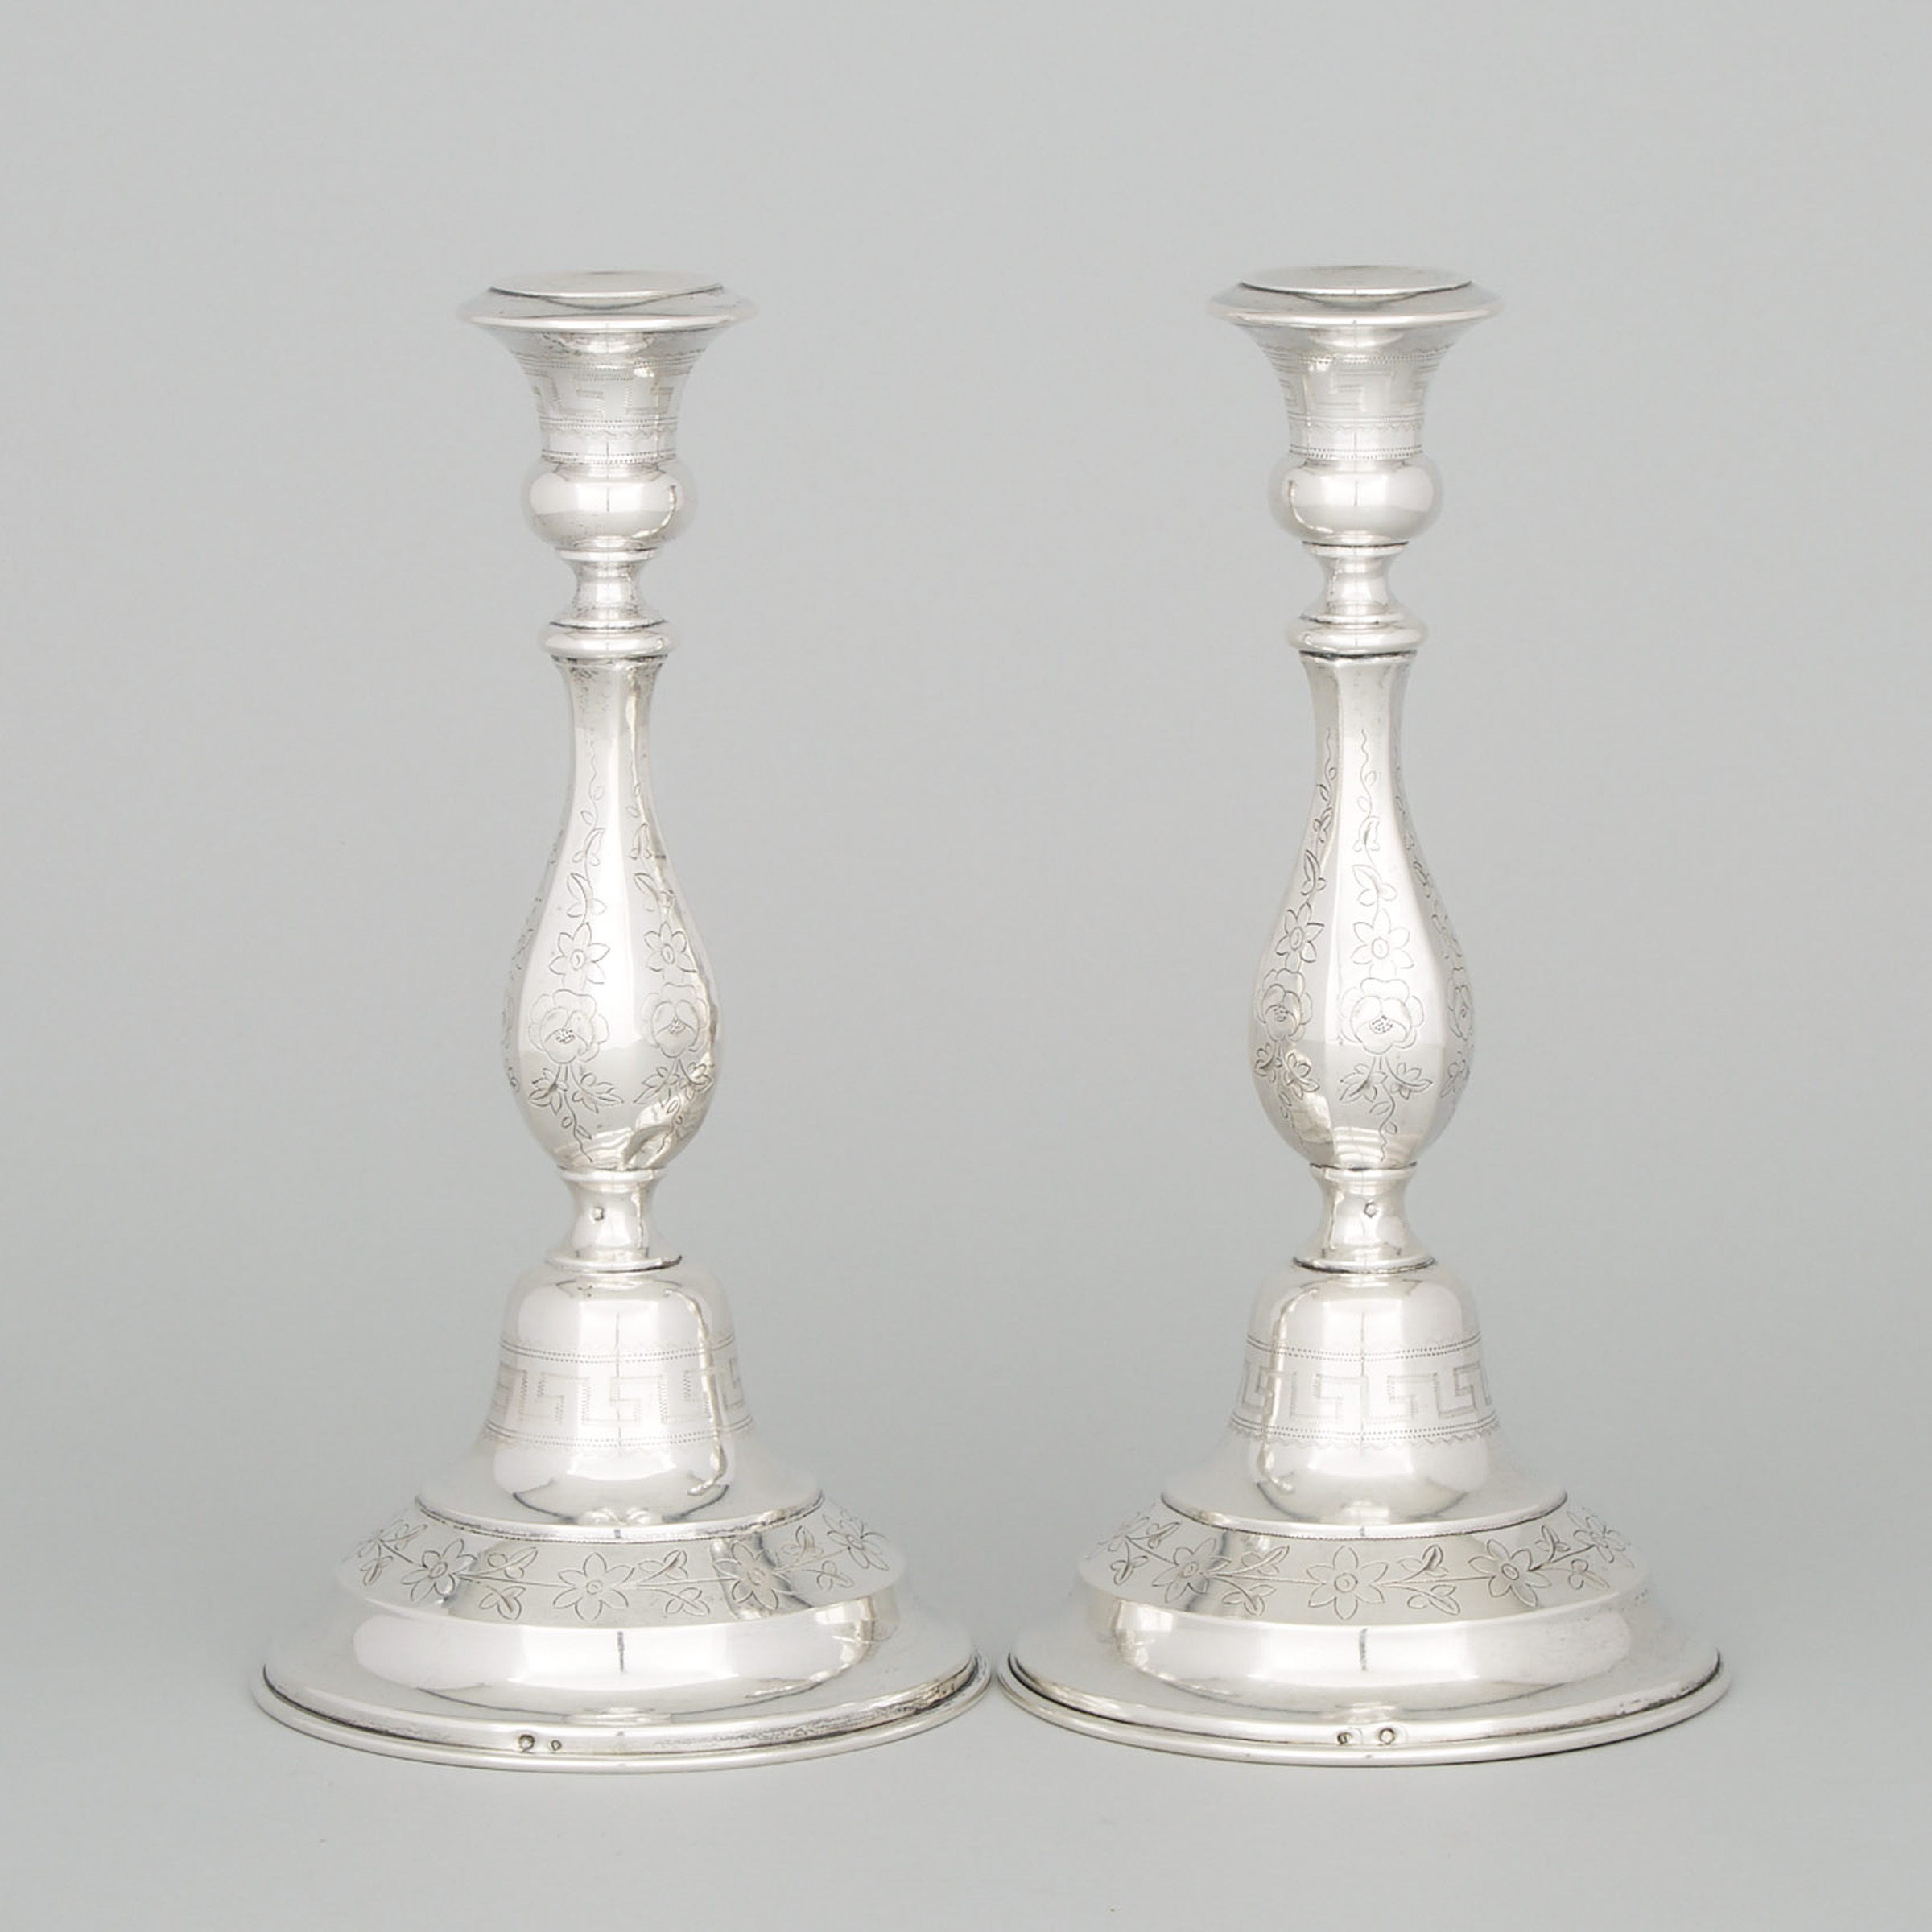 Pair of Austro-Hungarian Silver Candlesticks, Vienna, late 19th century